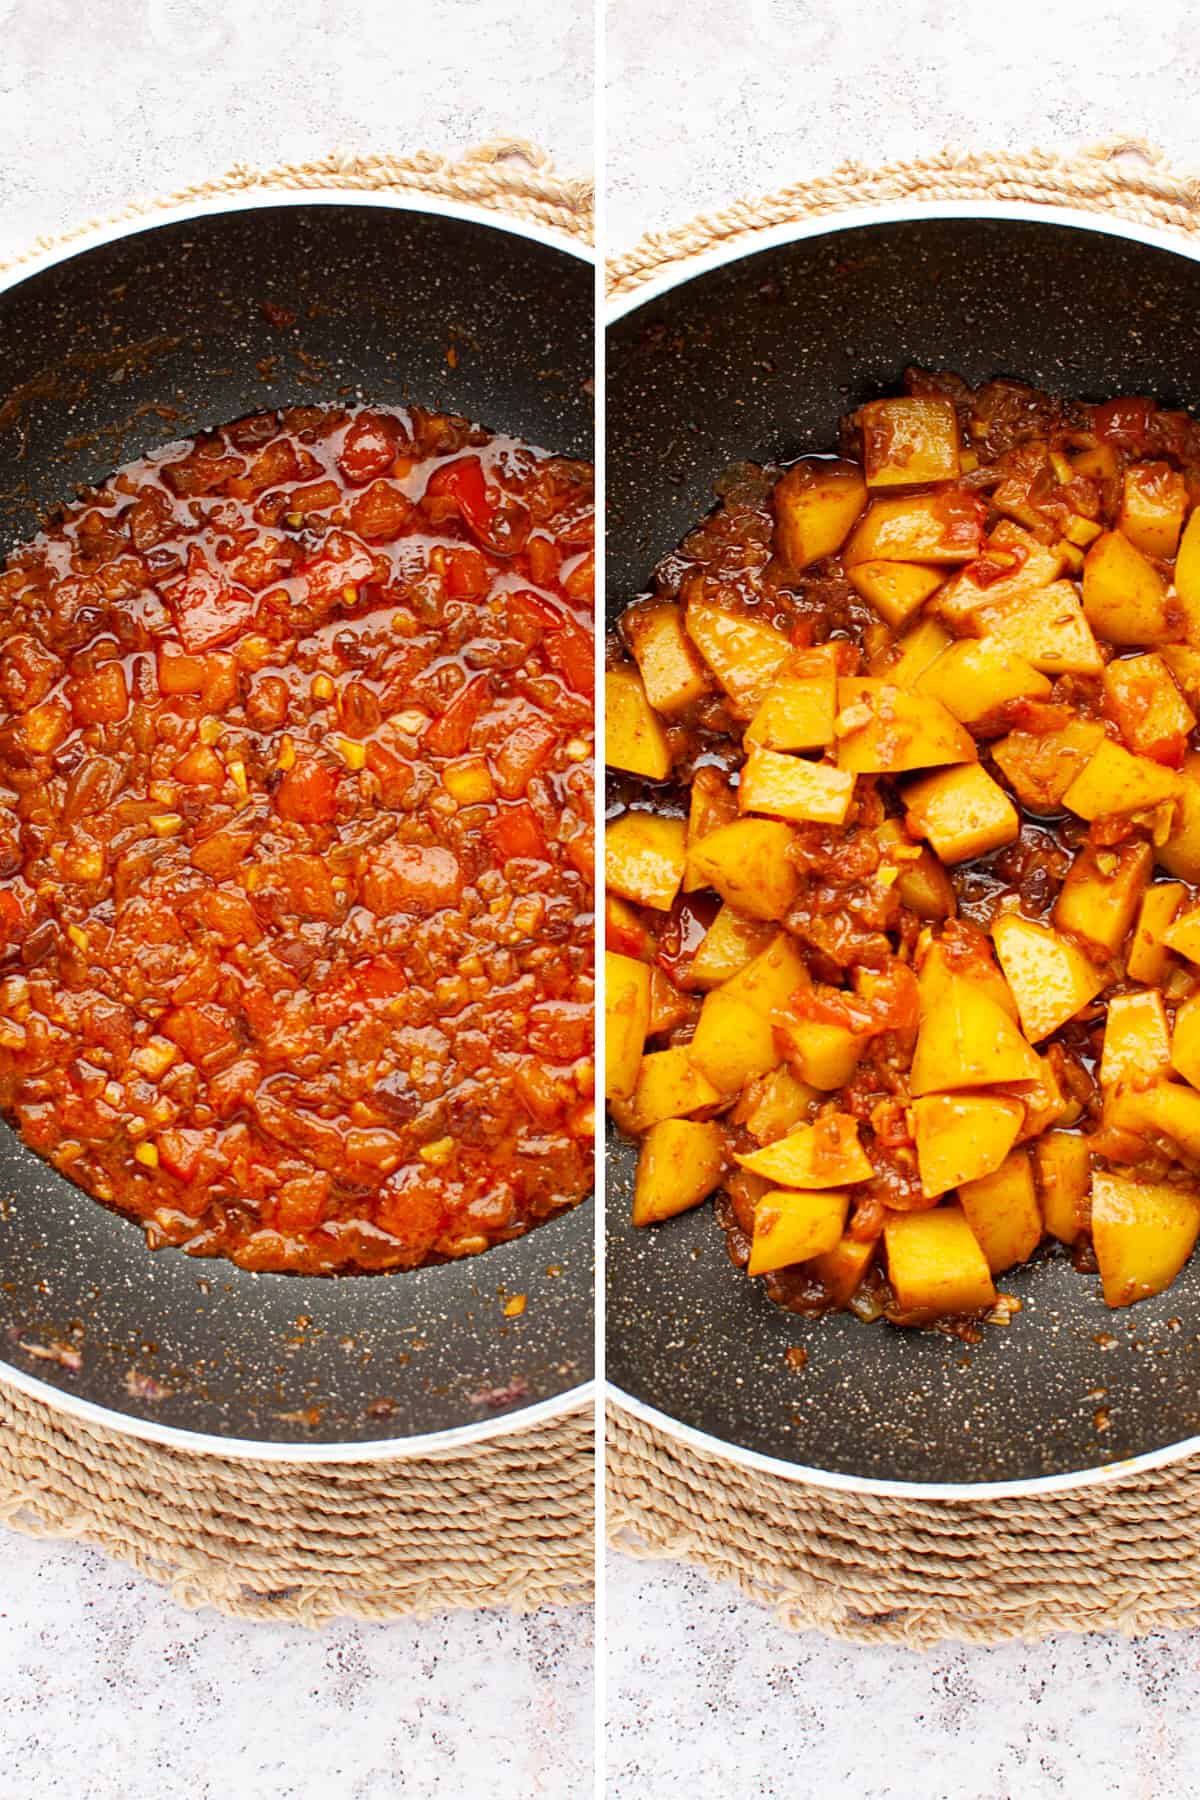 Collage: First image - onion and tomato masala in wok, second pic -potatoes added to the masala in wok.